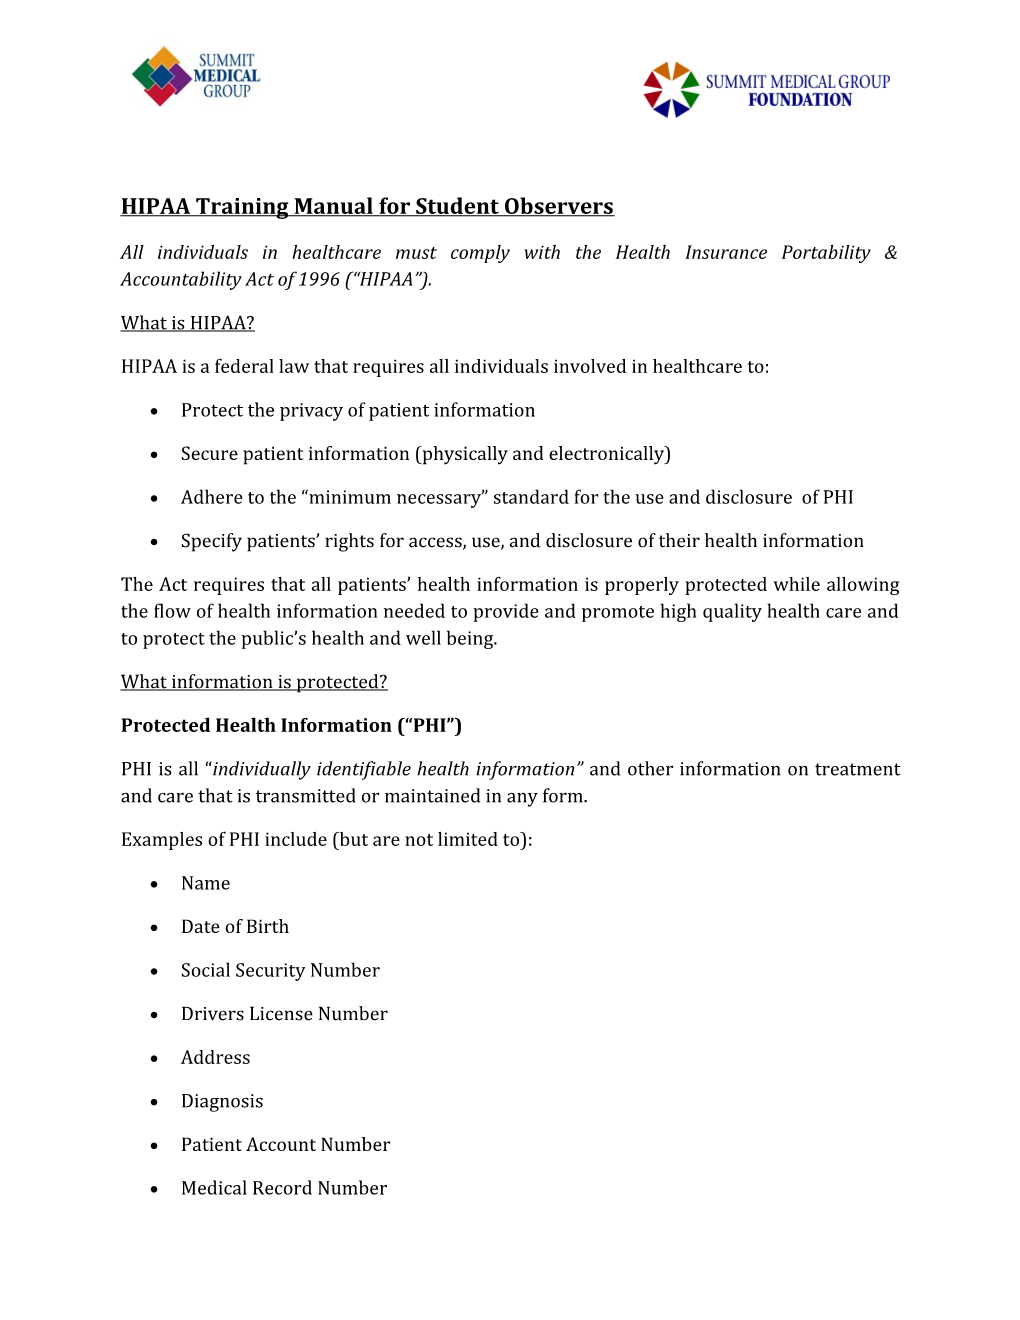 HIPAA Training Manual for Student Observers